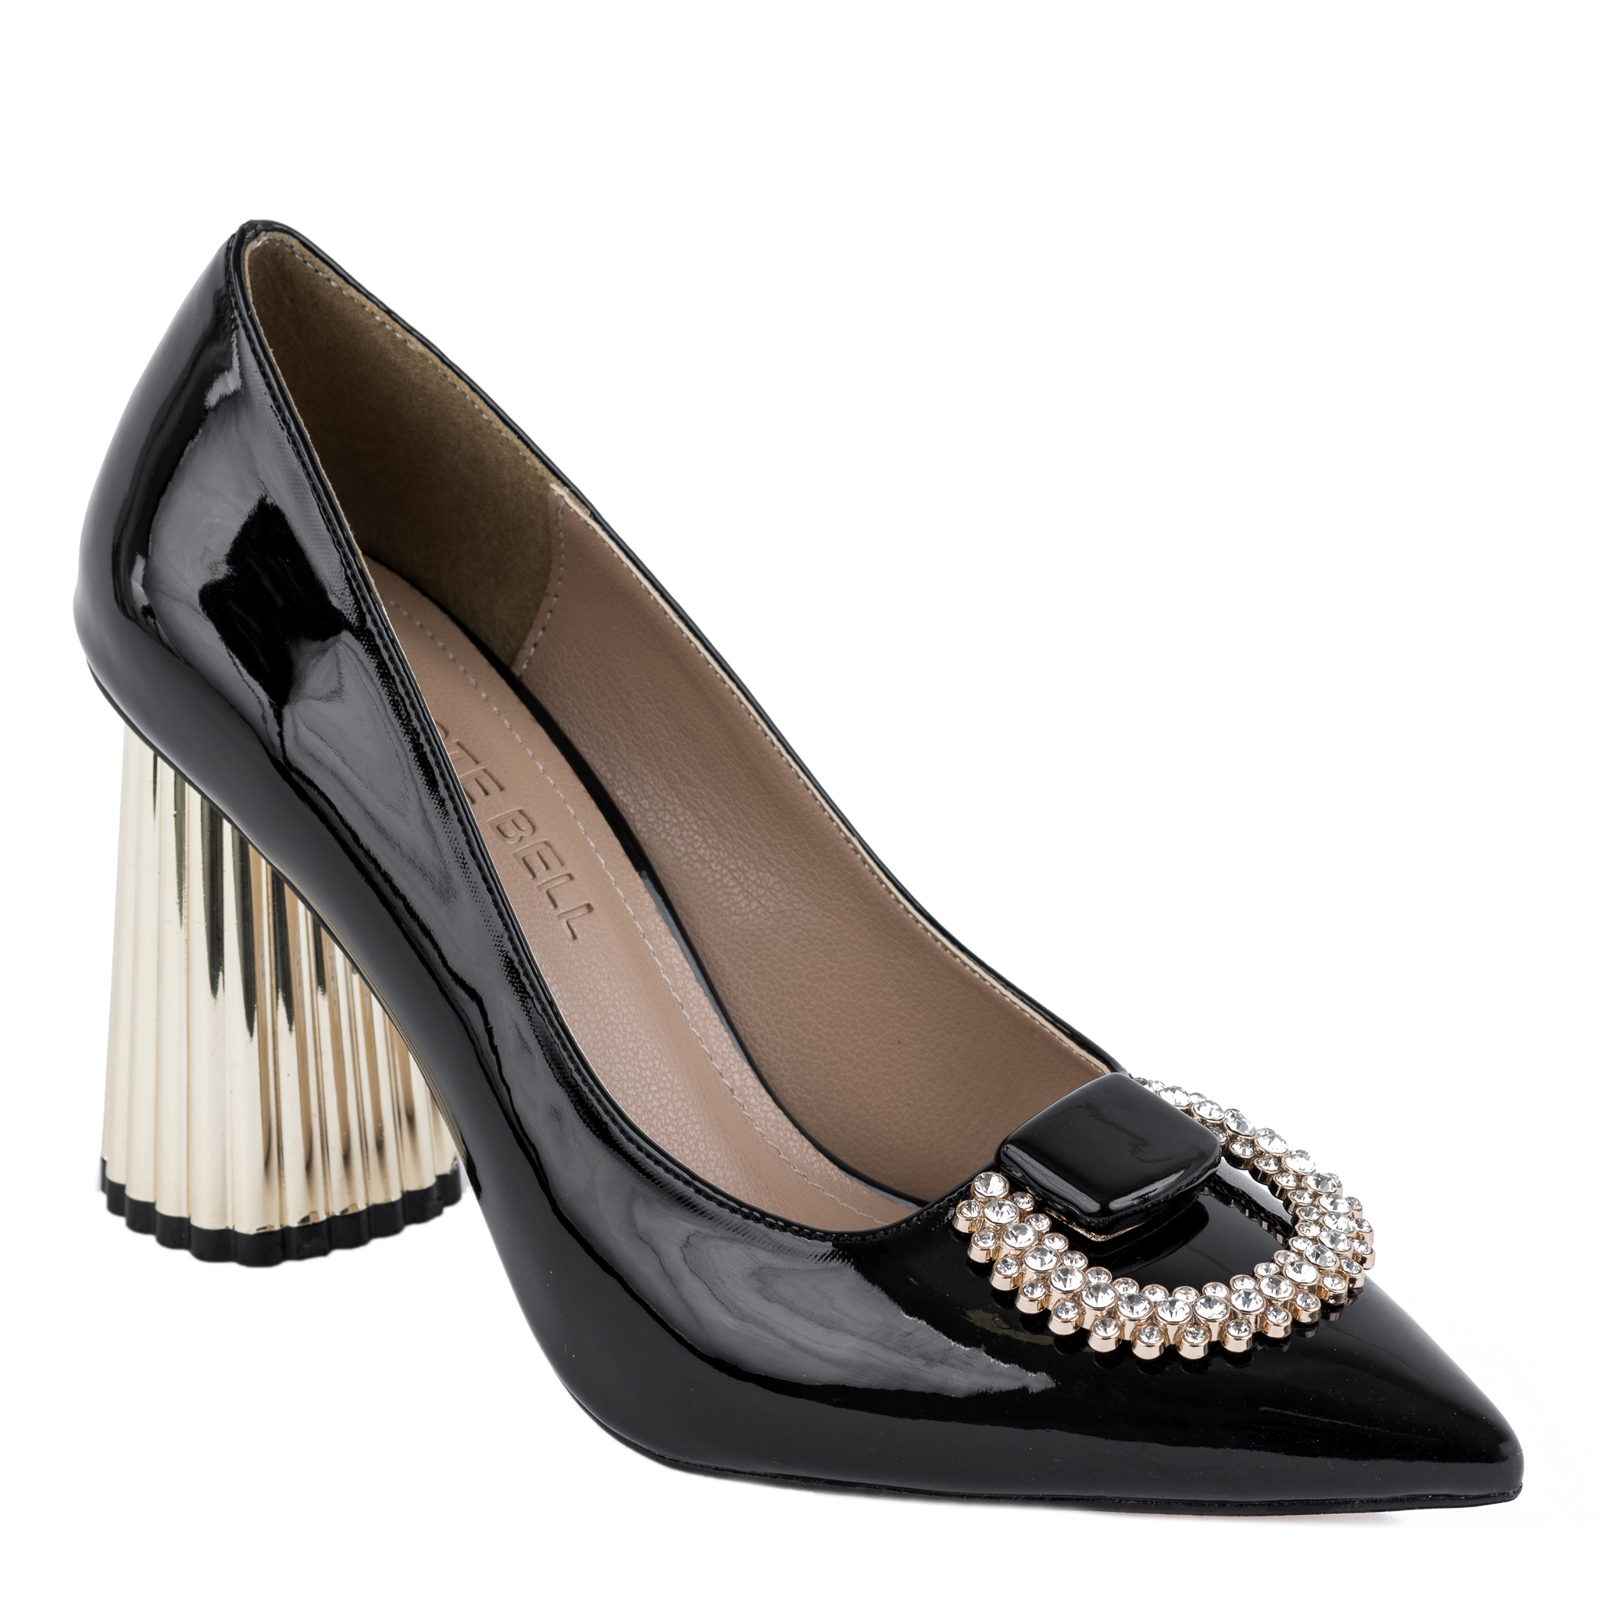 PATENT STILETTO SHOES WITH BROOCH AND BLOCK GOLDEN HEEL - BLACK